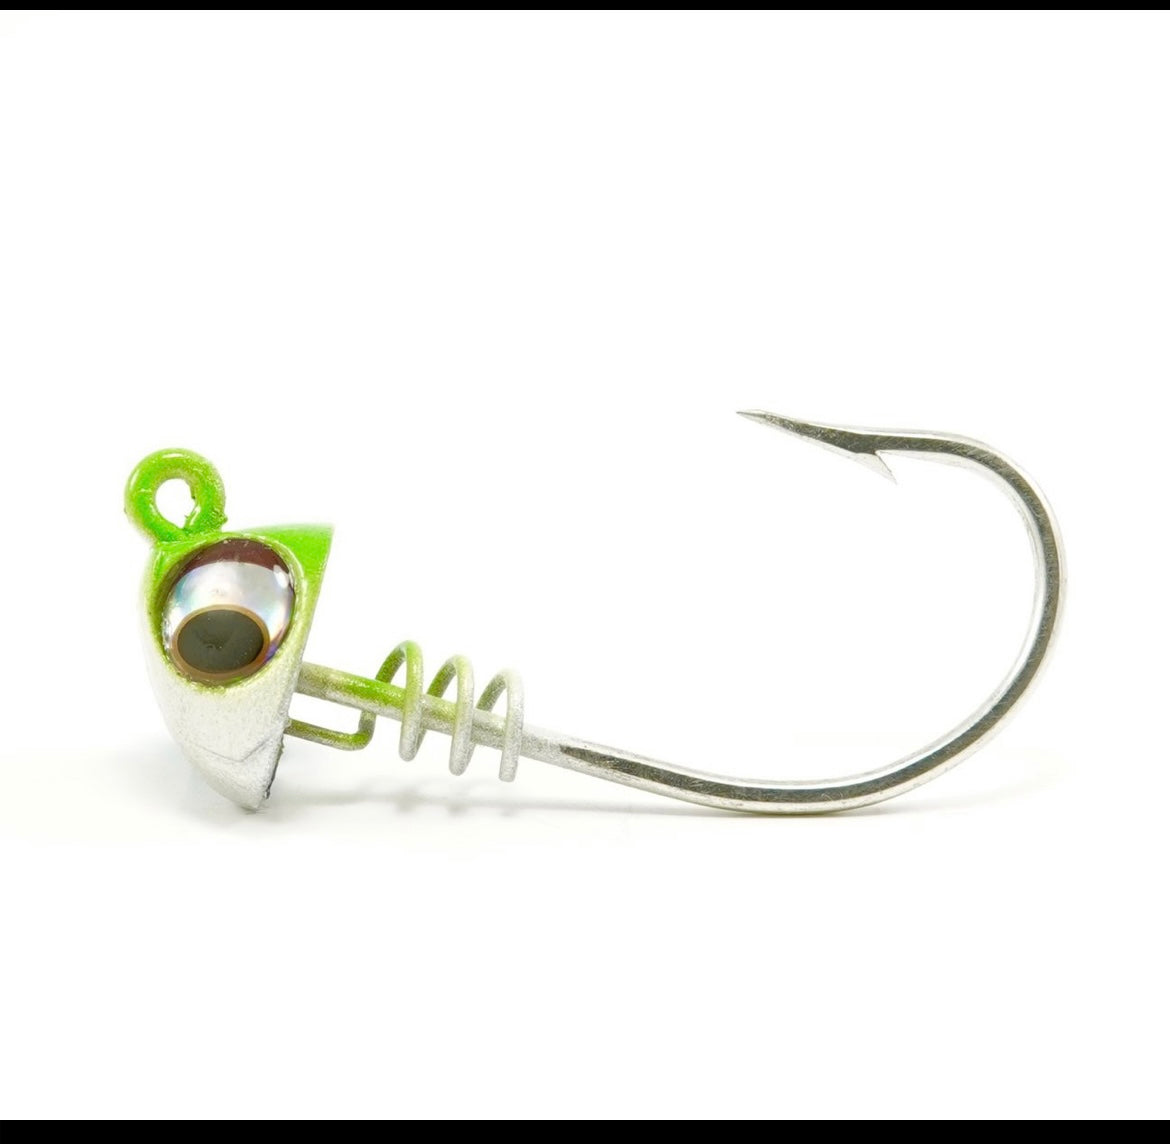 No Live Bait Needed - 5” Jig Heads - Reel Deal Tackle